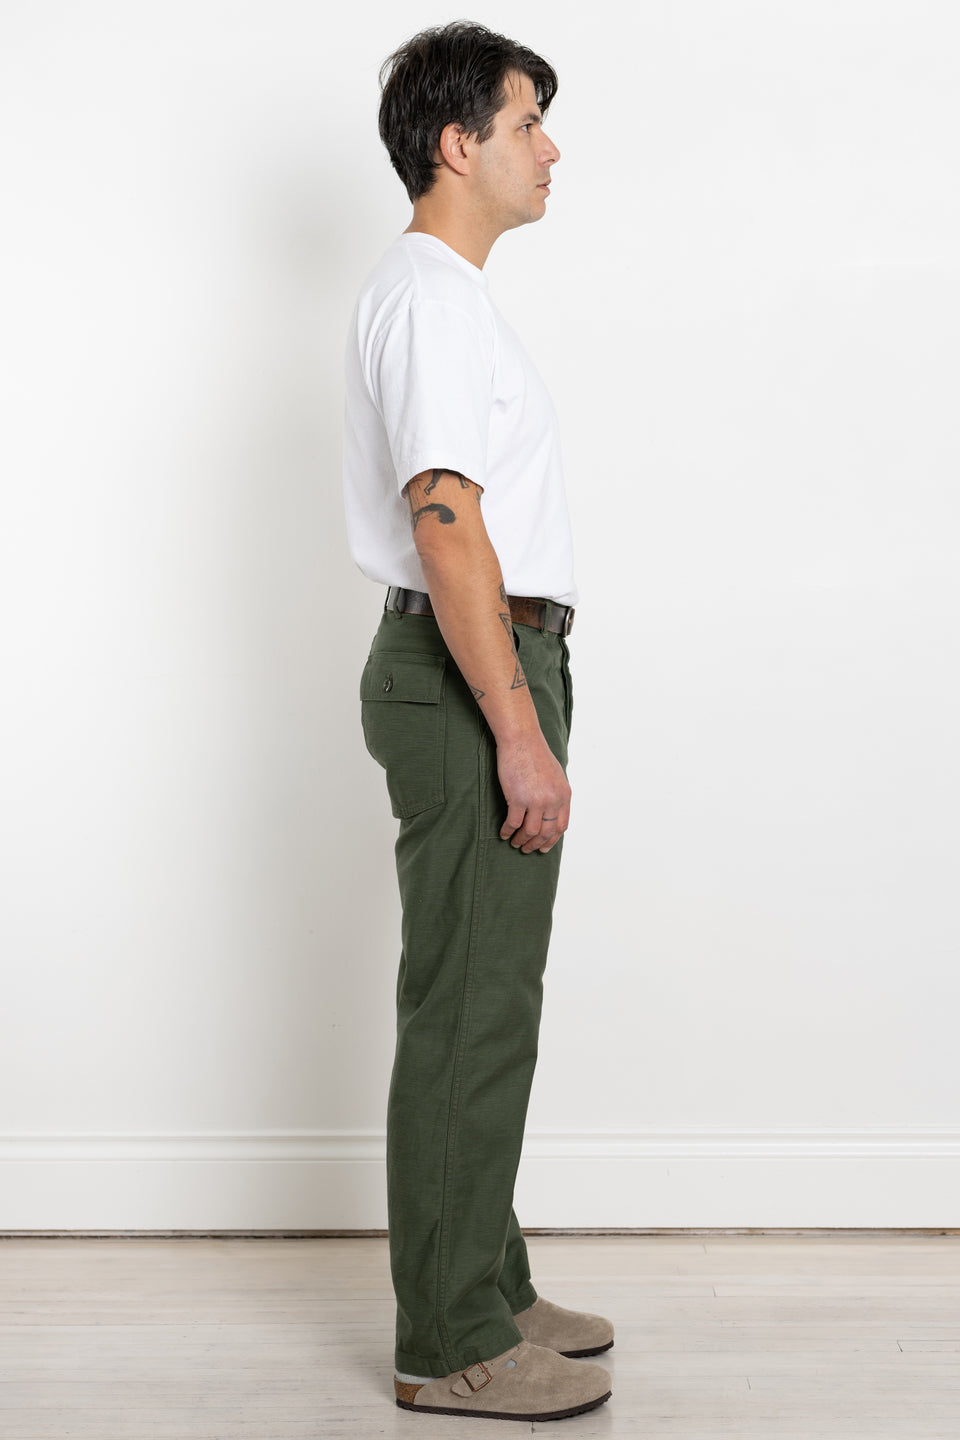 orSlow Japan 23AW FW23 Men's Collection US Army Fatigue Pants Regular Fit Green  Calculus Victoria BC Canada